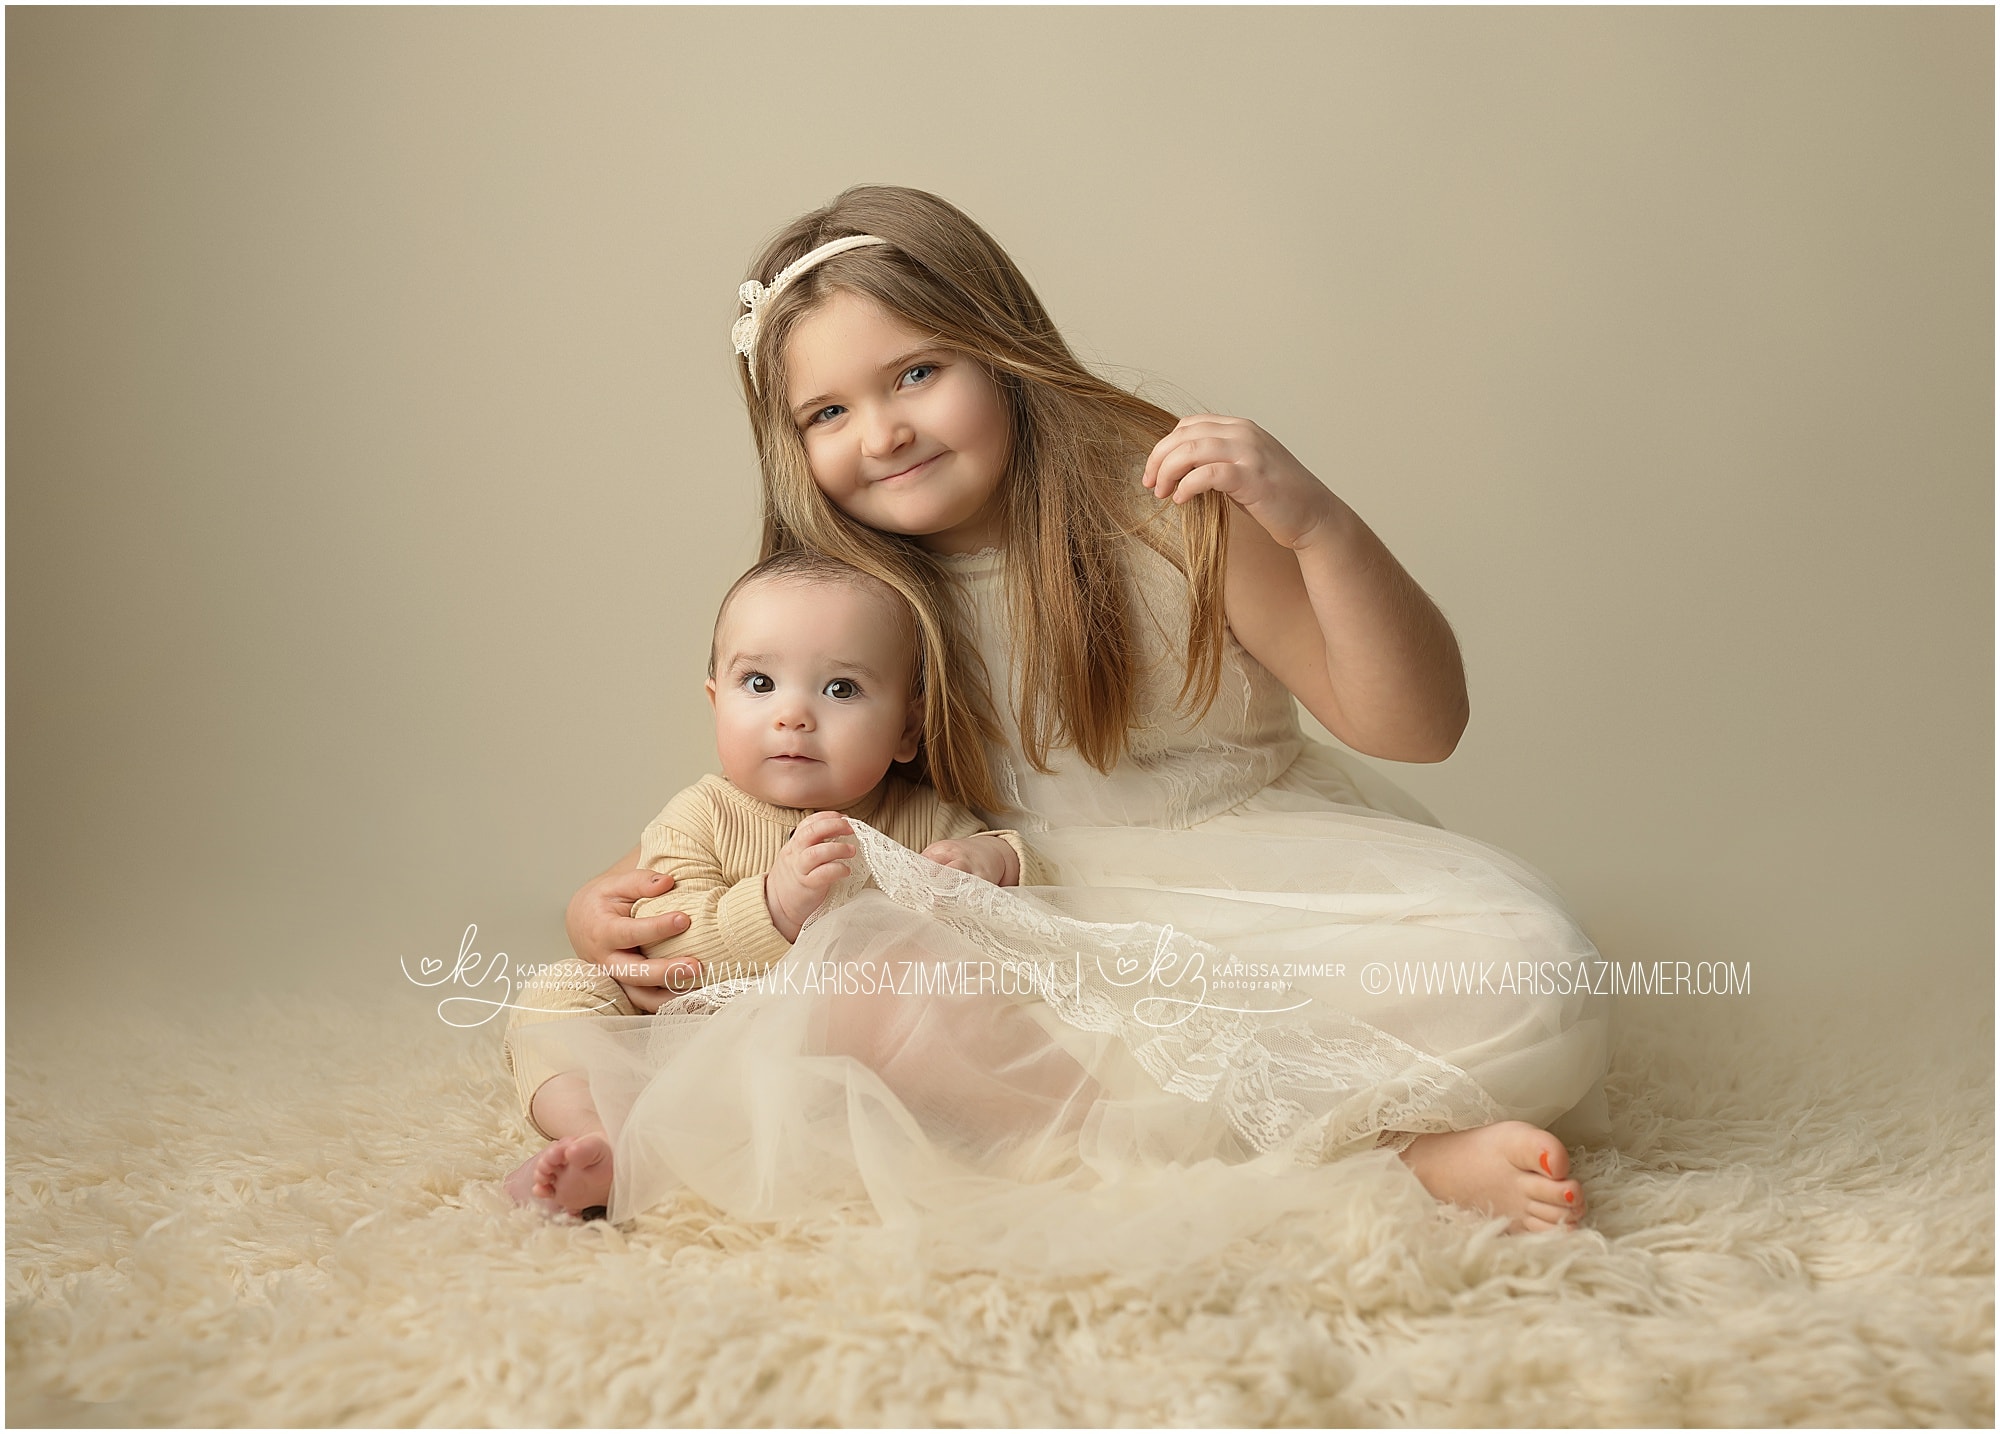 baby boy with older sister in photography studio